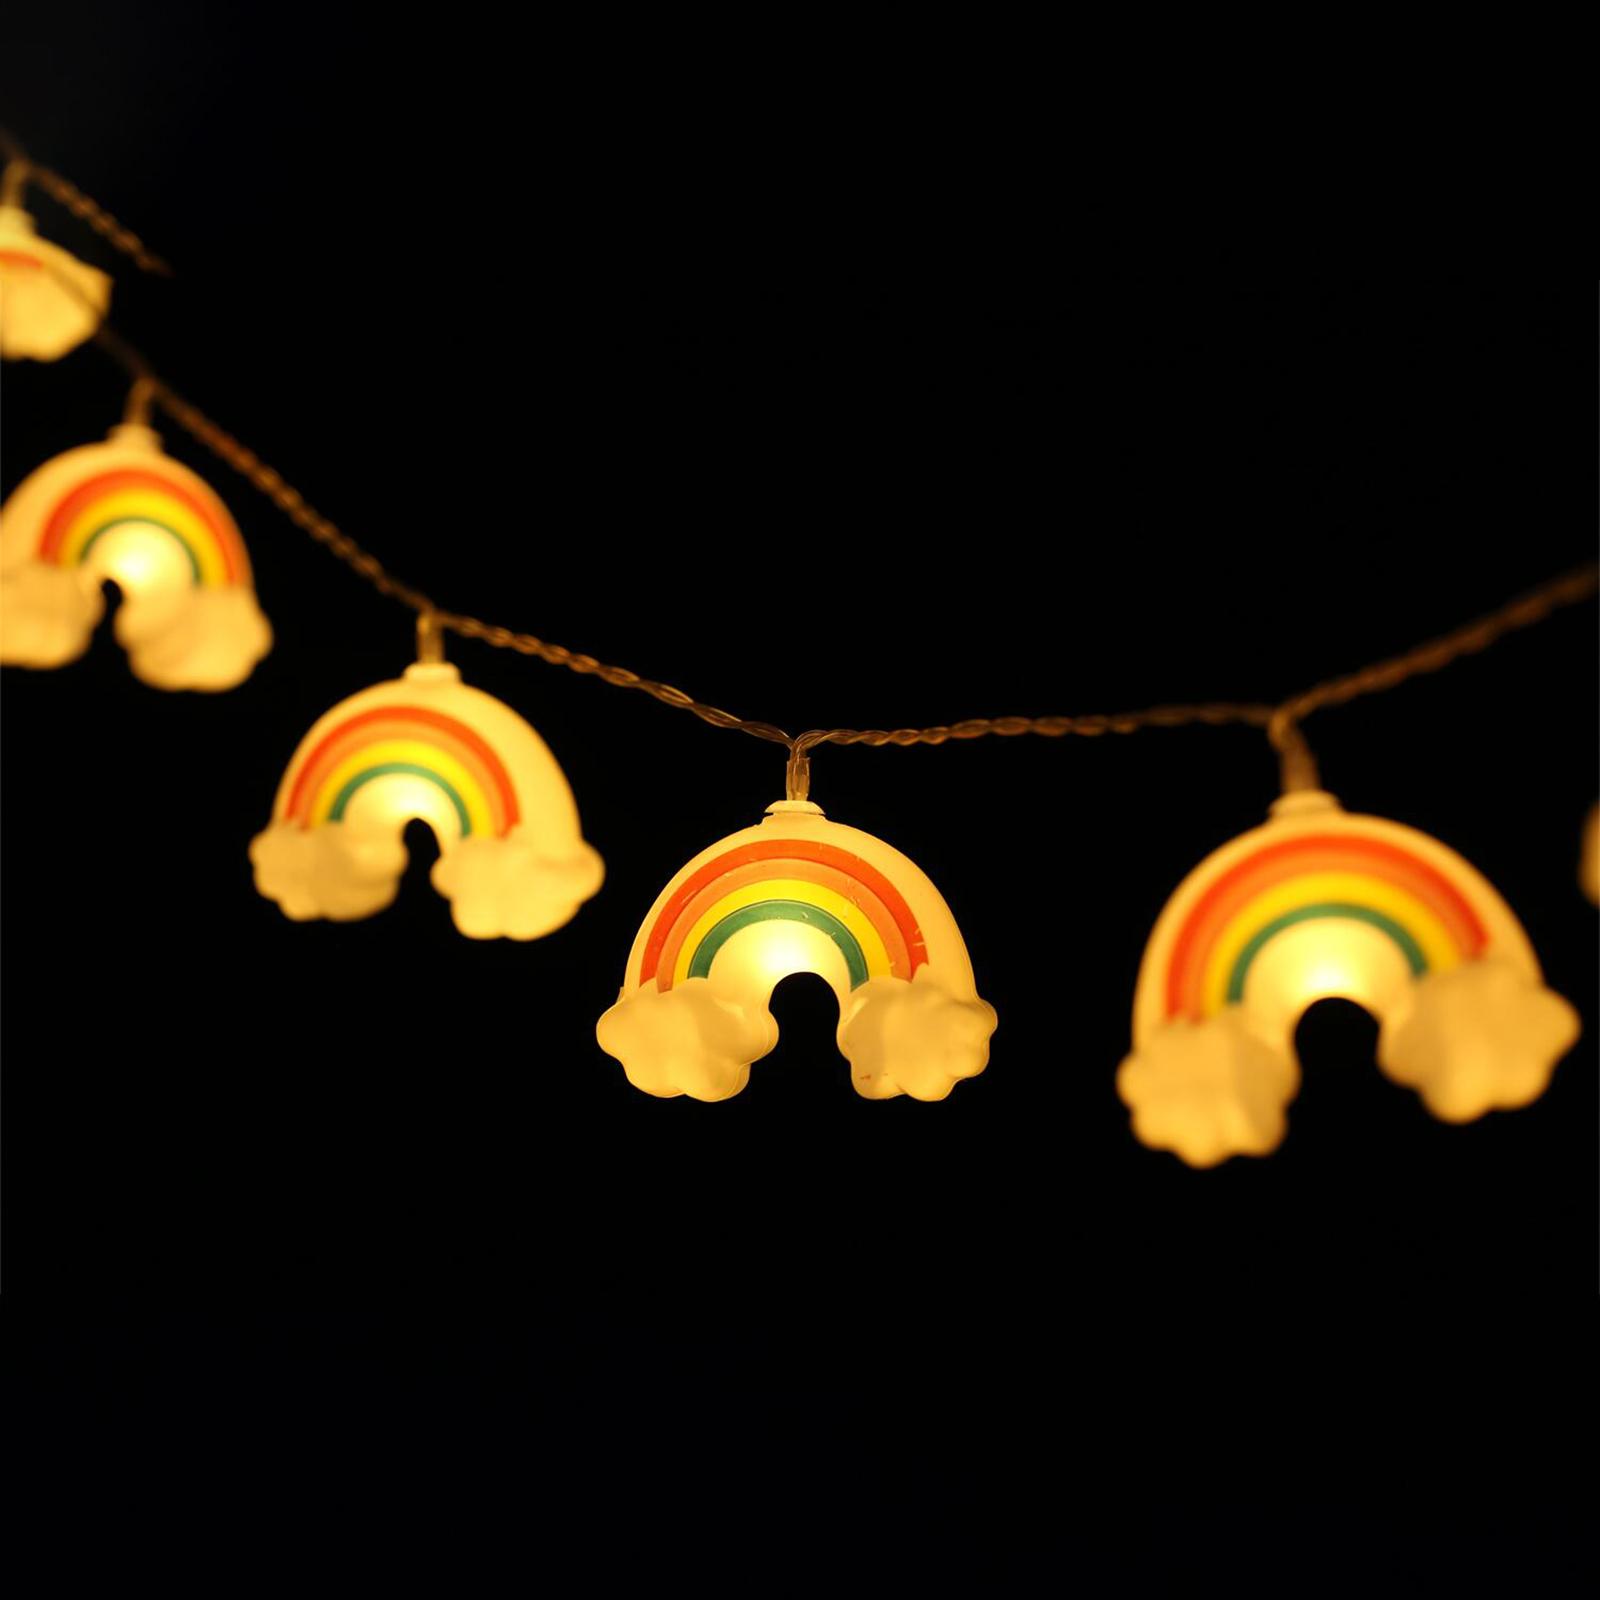 LED Rainbow String Lights Fairy Lights Lamp Funny for Holiday Party Decor